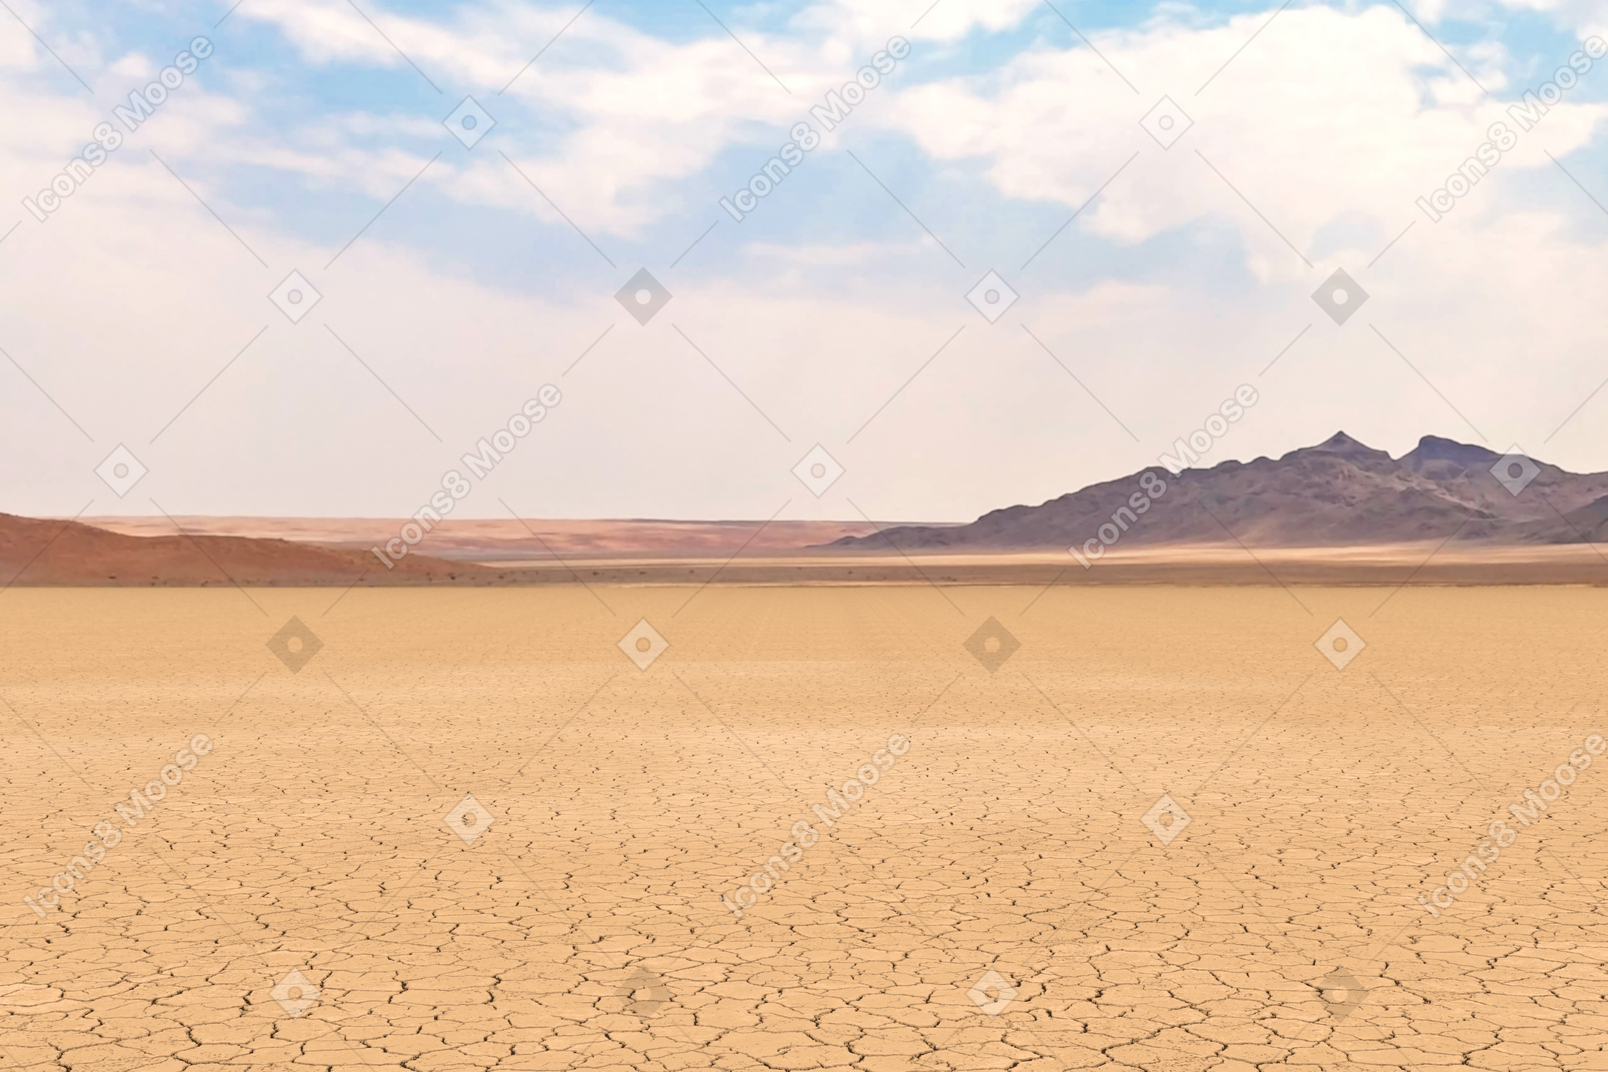 Desert landscape with cracked earth